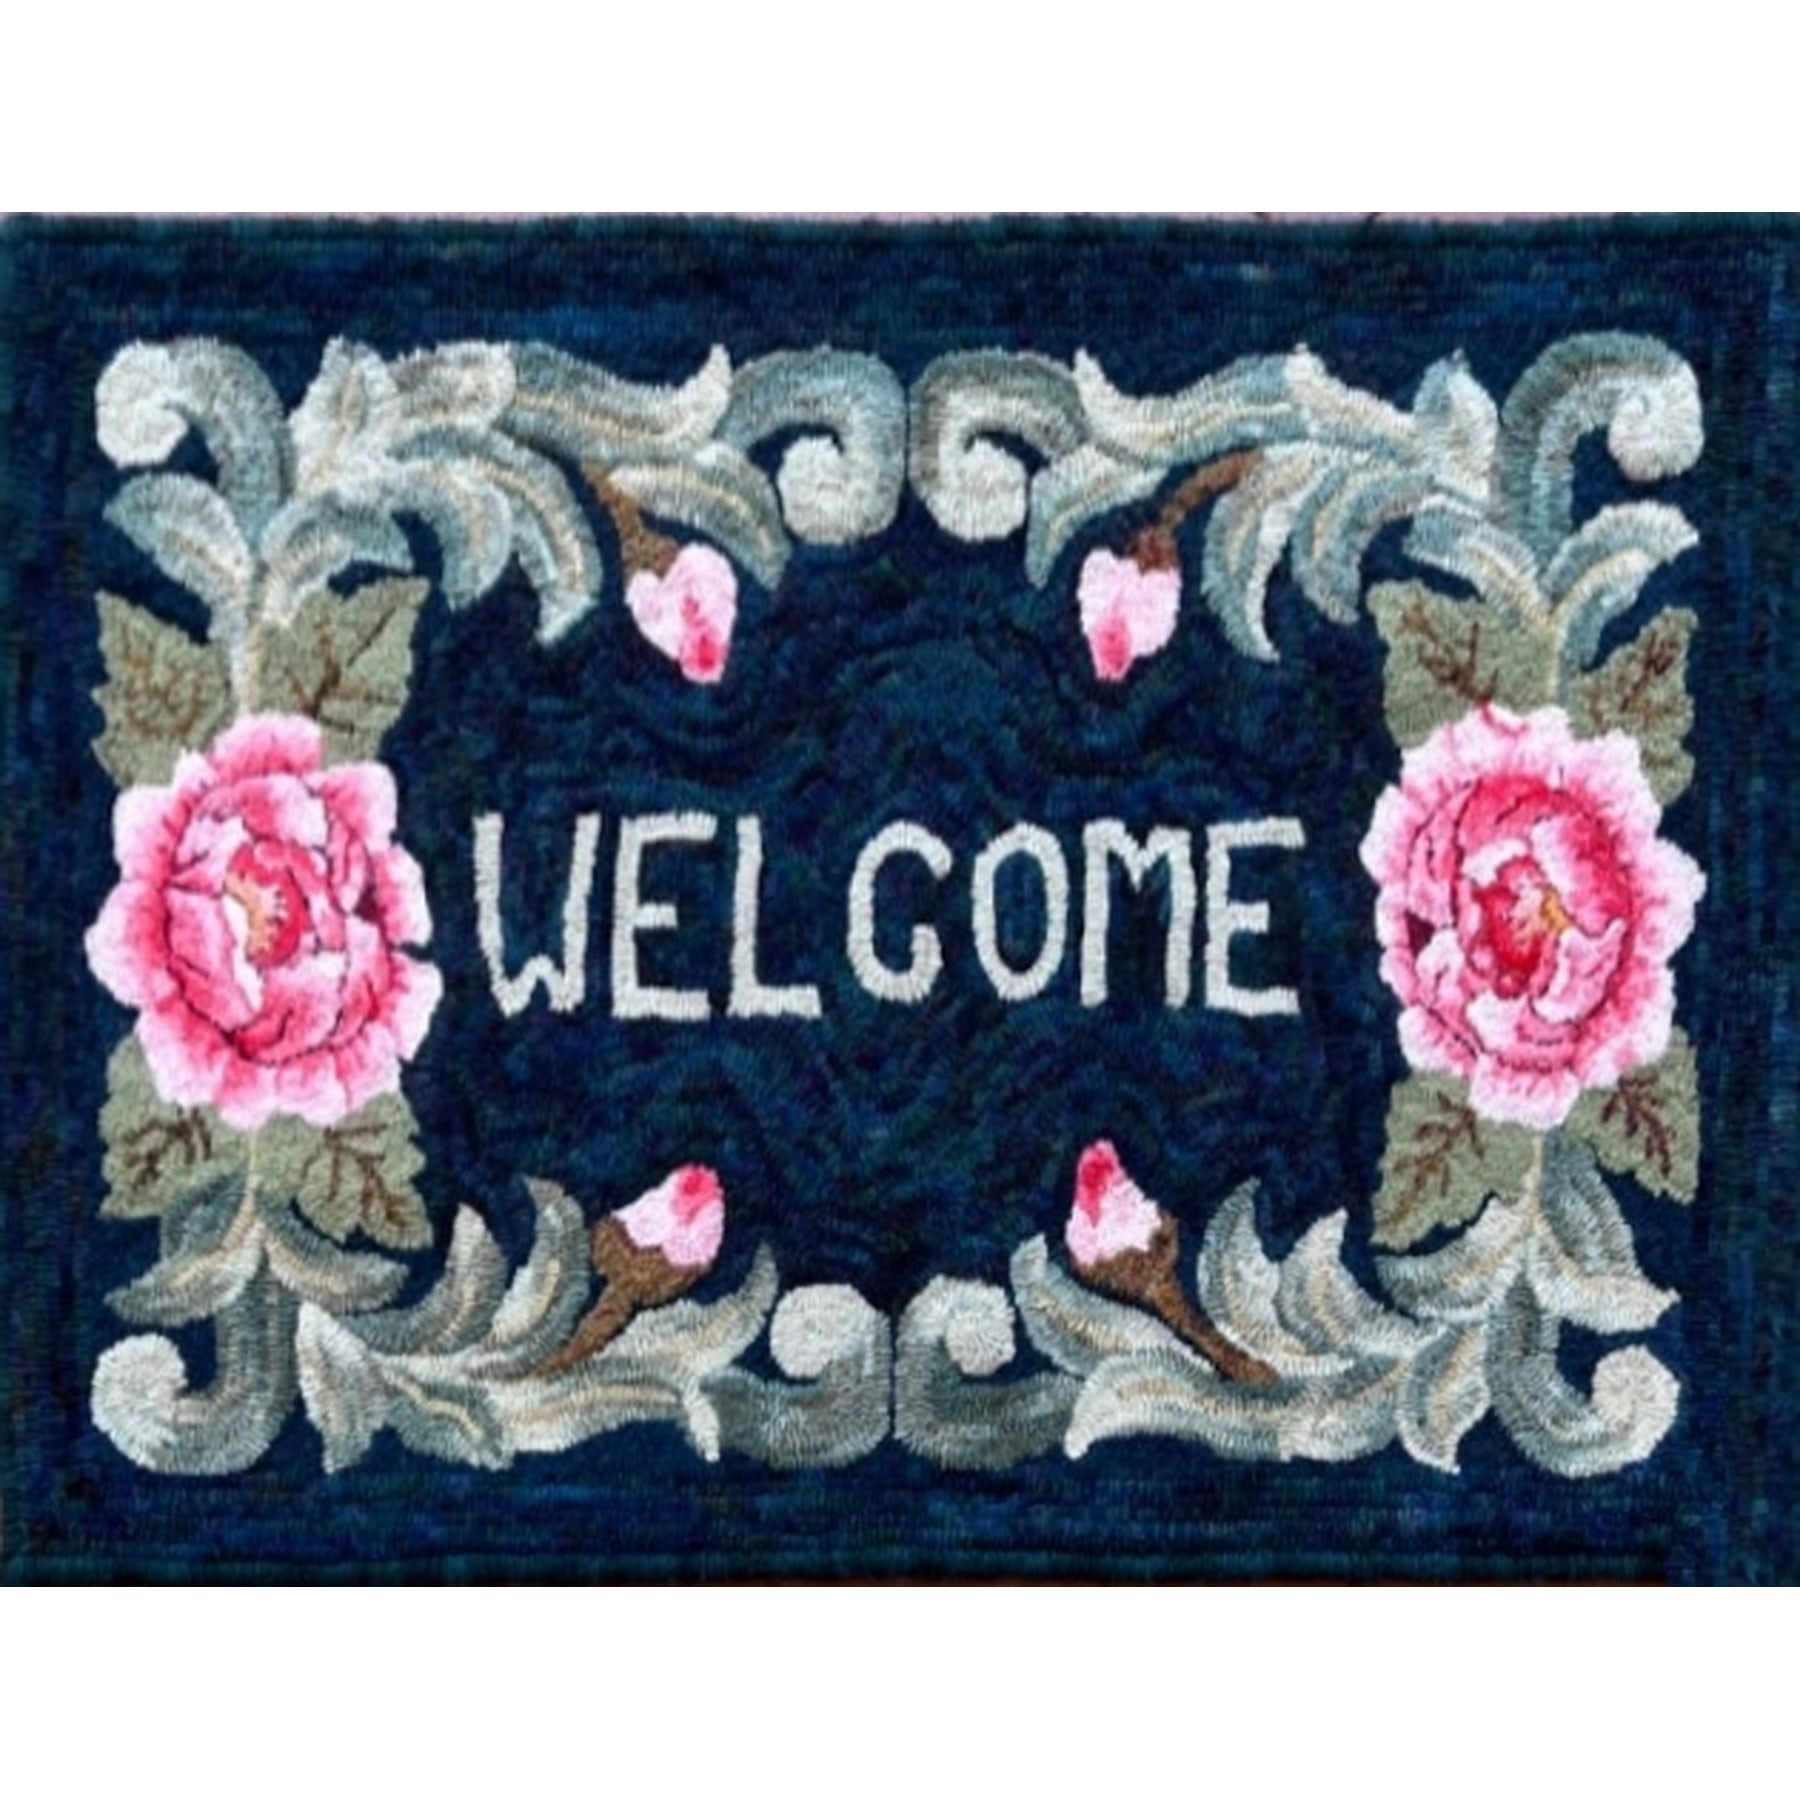 An Old Fashioned Welcome, rug hooked by Silvia Burk